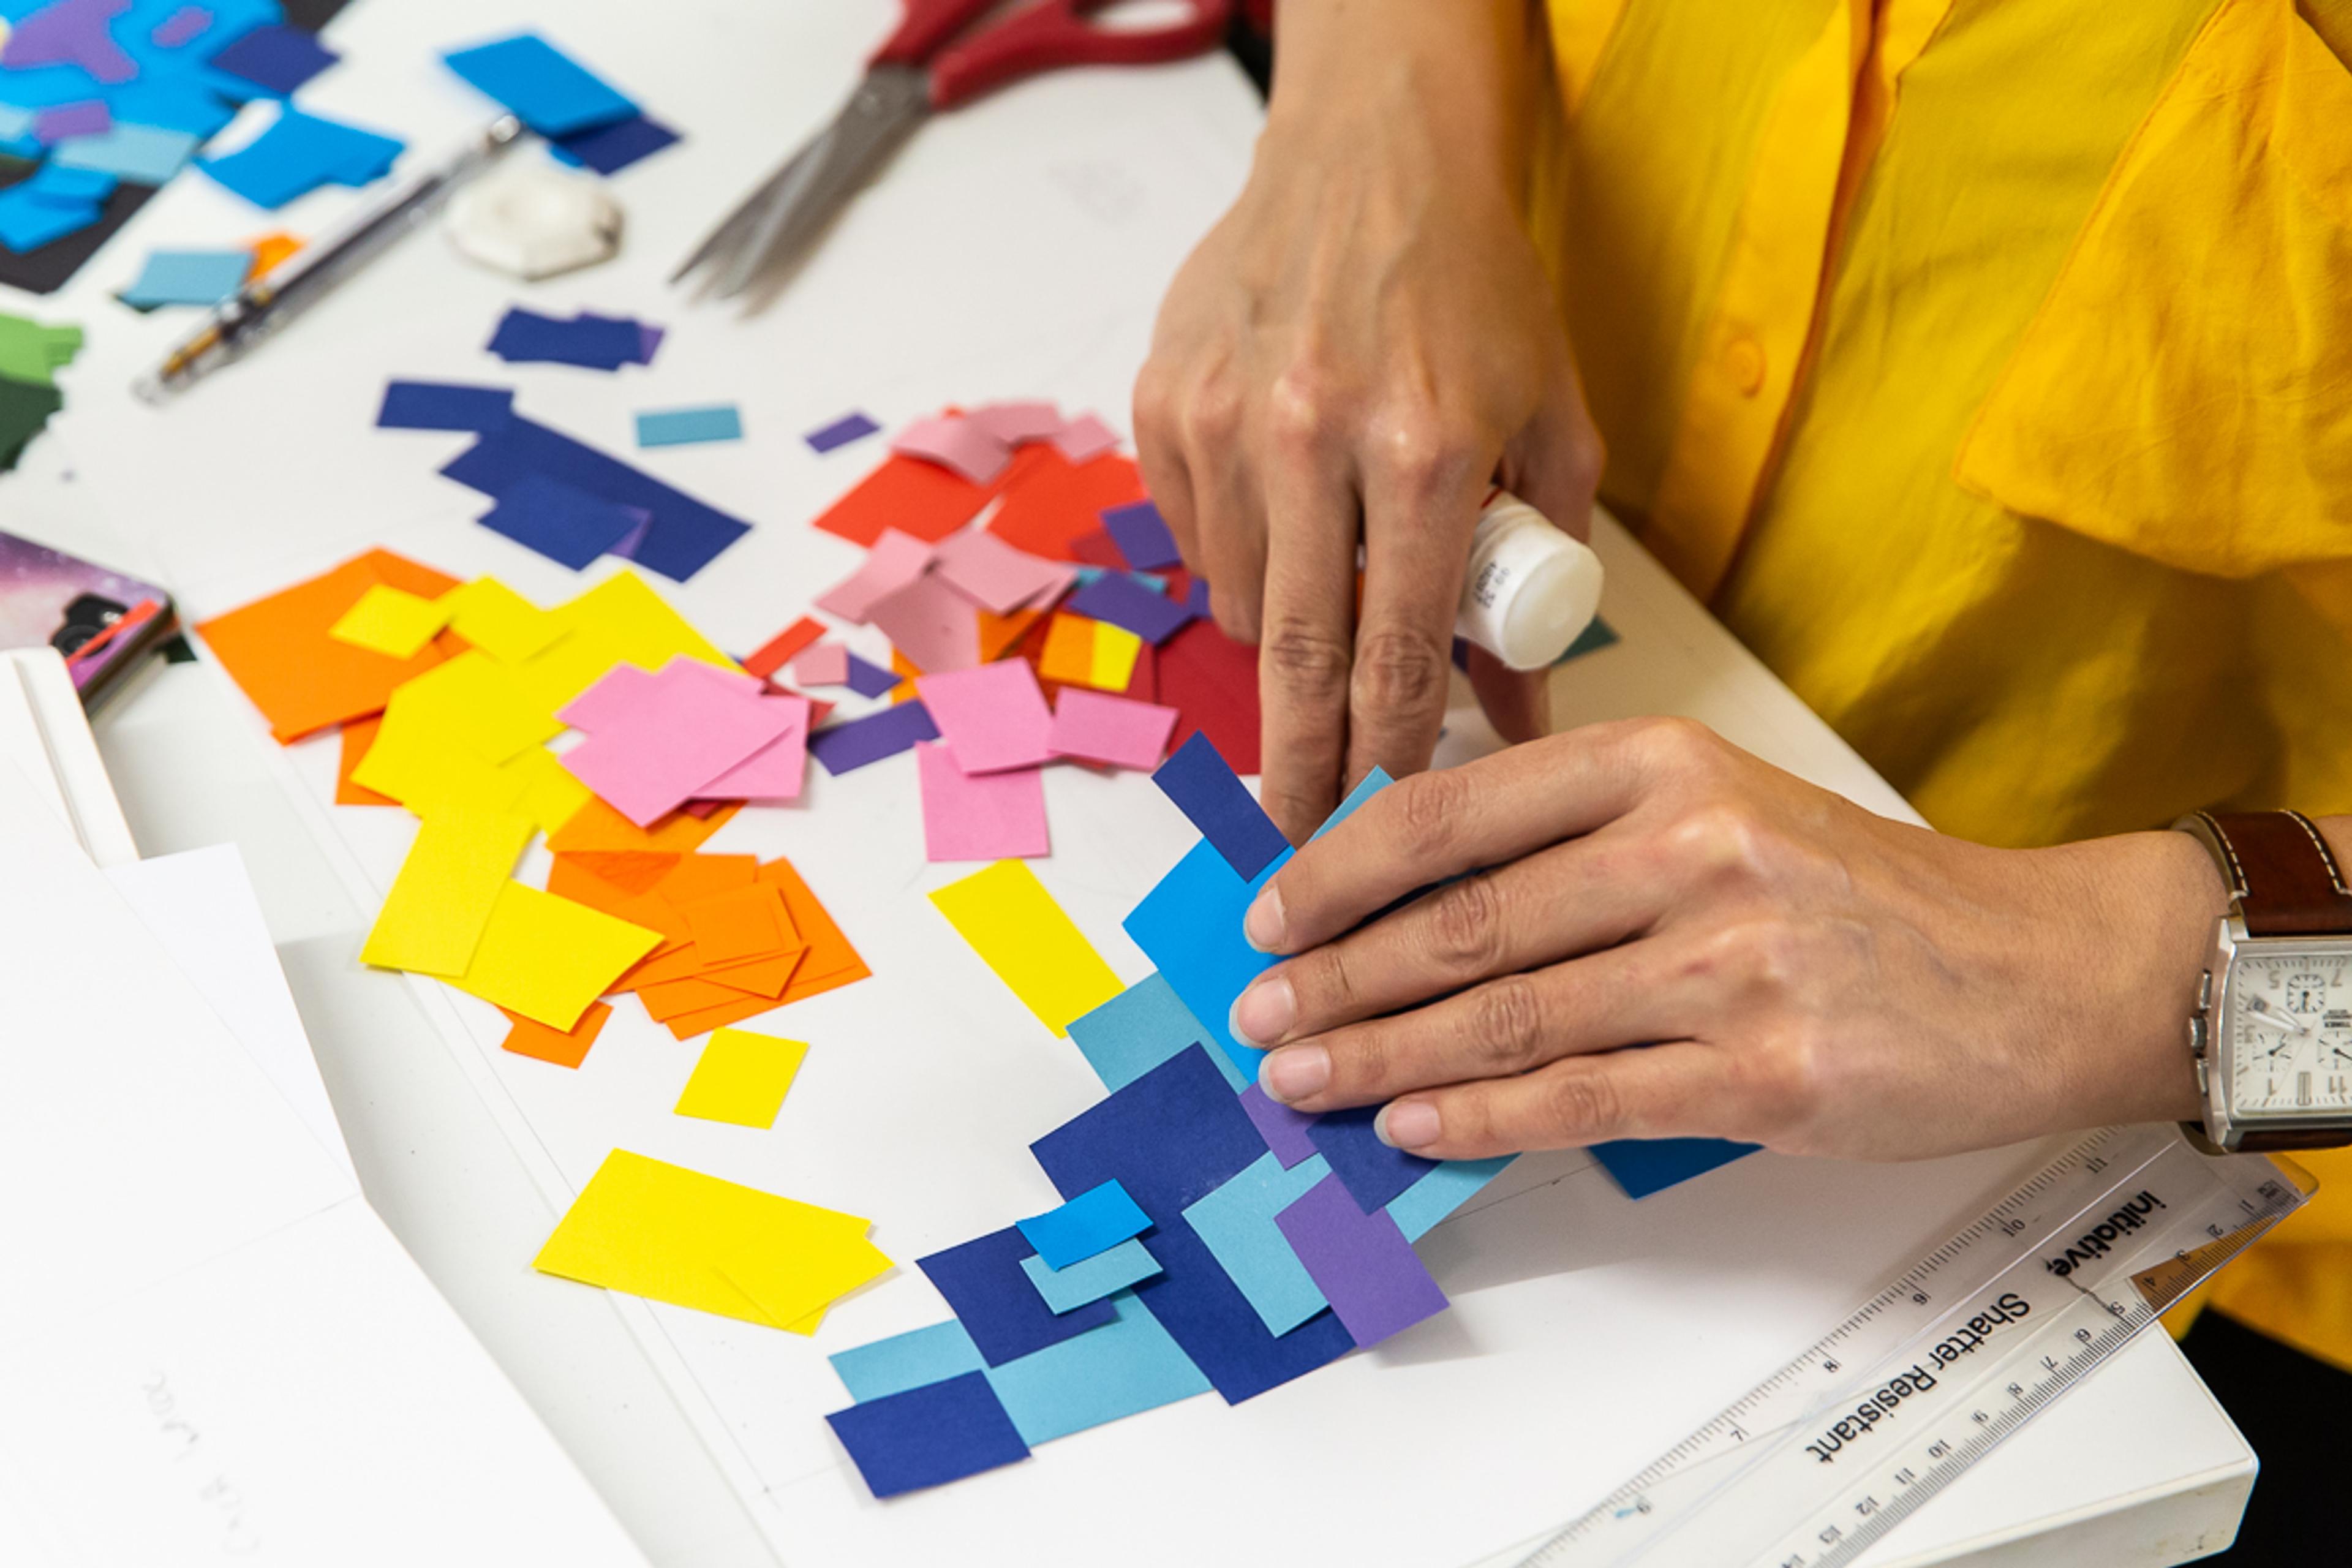 Photograph of hands making a collage from coloured paper squares